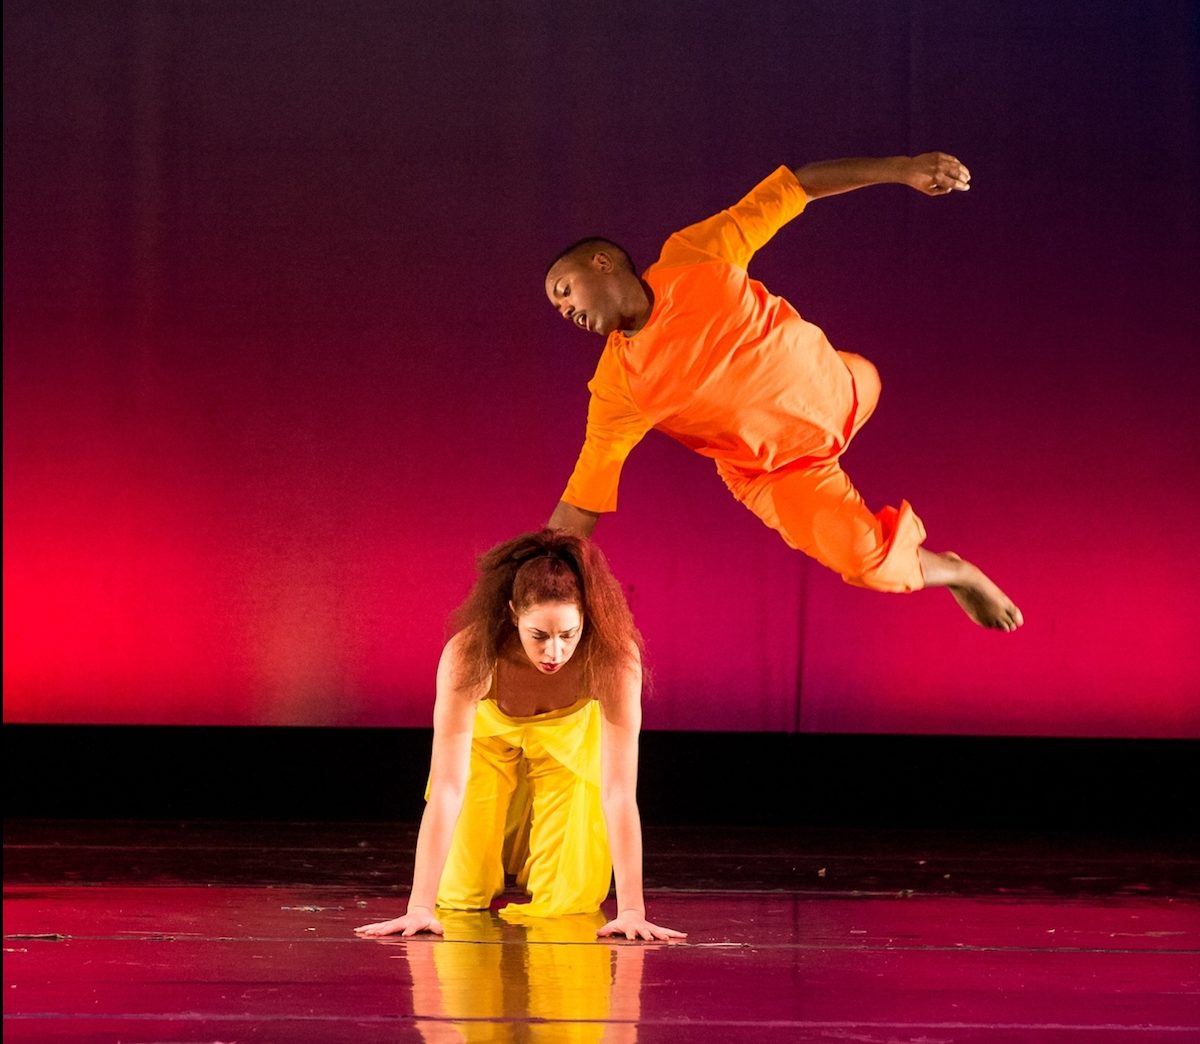 Sacramento/Black Art of Dance, which will perform in the University Theatre in Shasta Hall beginning on Feb. 22, is a retirement celebration for African-Caribbean Dance, Choreography, Dunham Technique Professor Linda Goodrich. The product will also be Goodrichs final performance with the show. (Photo courtesy of Theater and Dance Department)